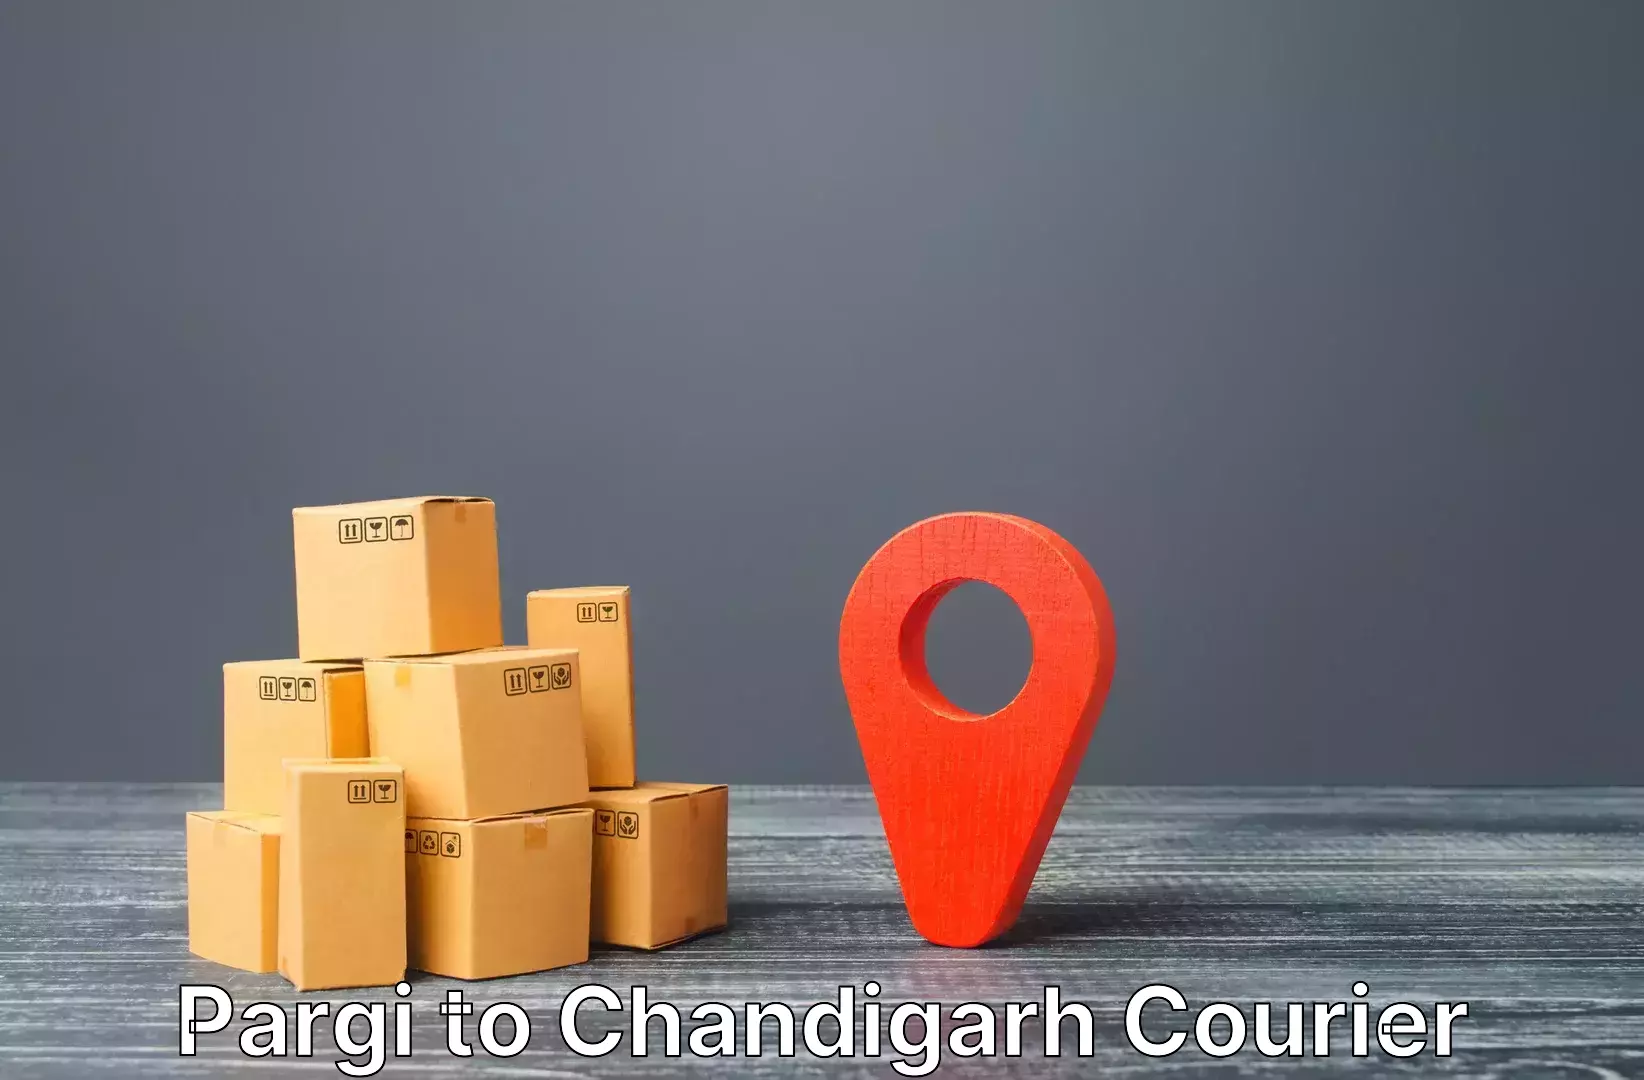 Luggage transfer service in Pargi to Chandigarh